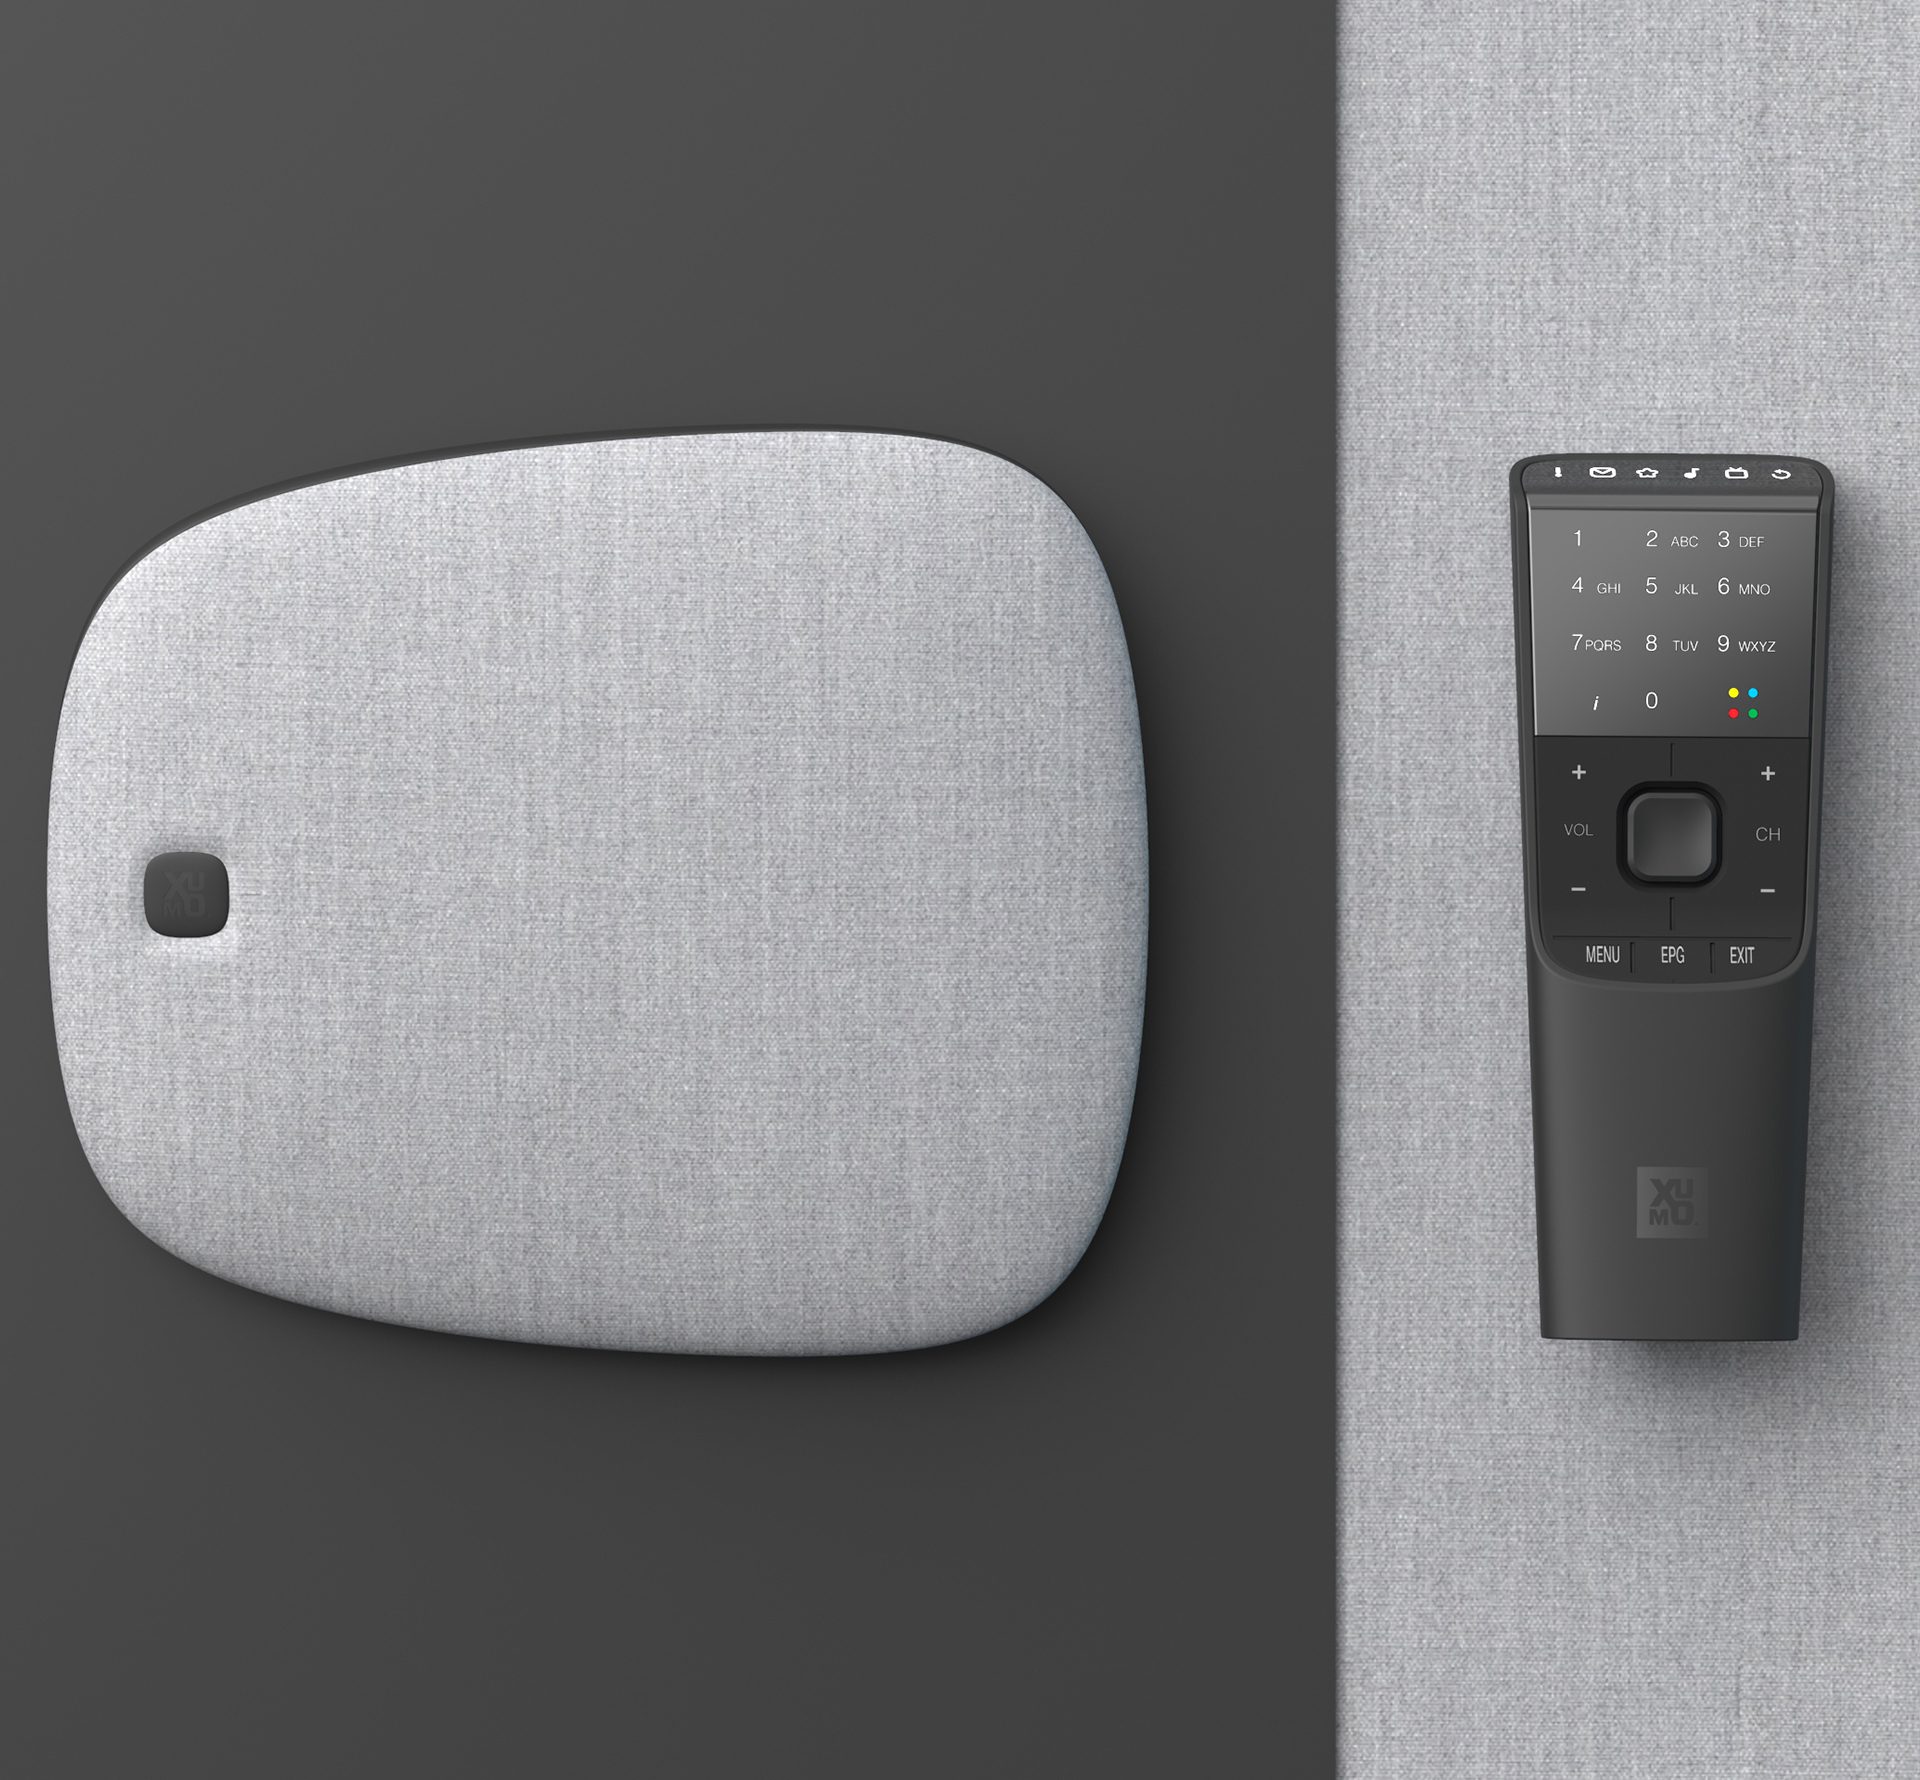 Building a stand-out product identity. Xumo set top box and controller on 2 tone grey background